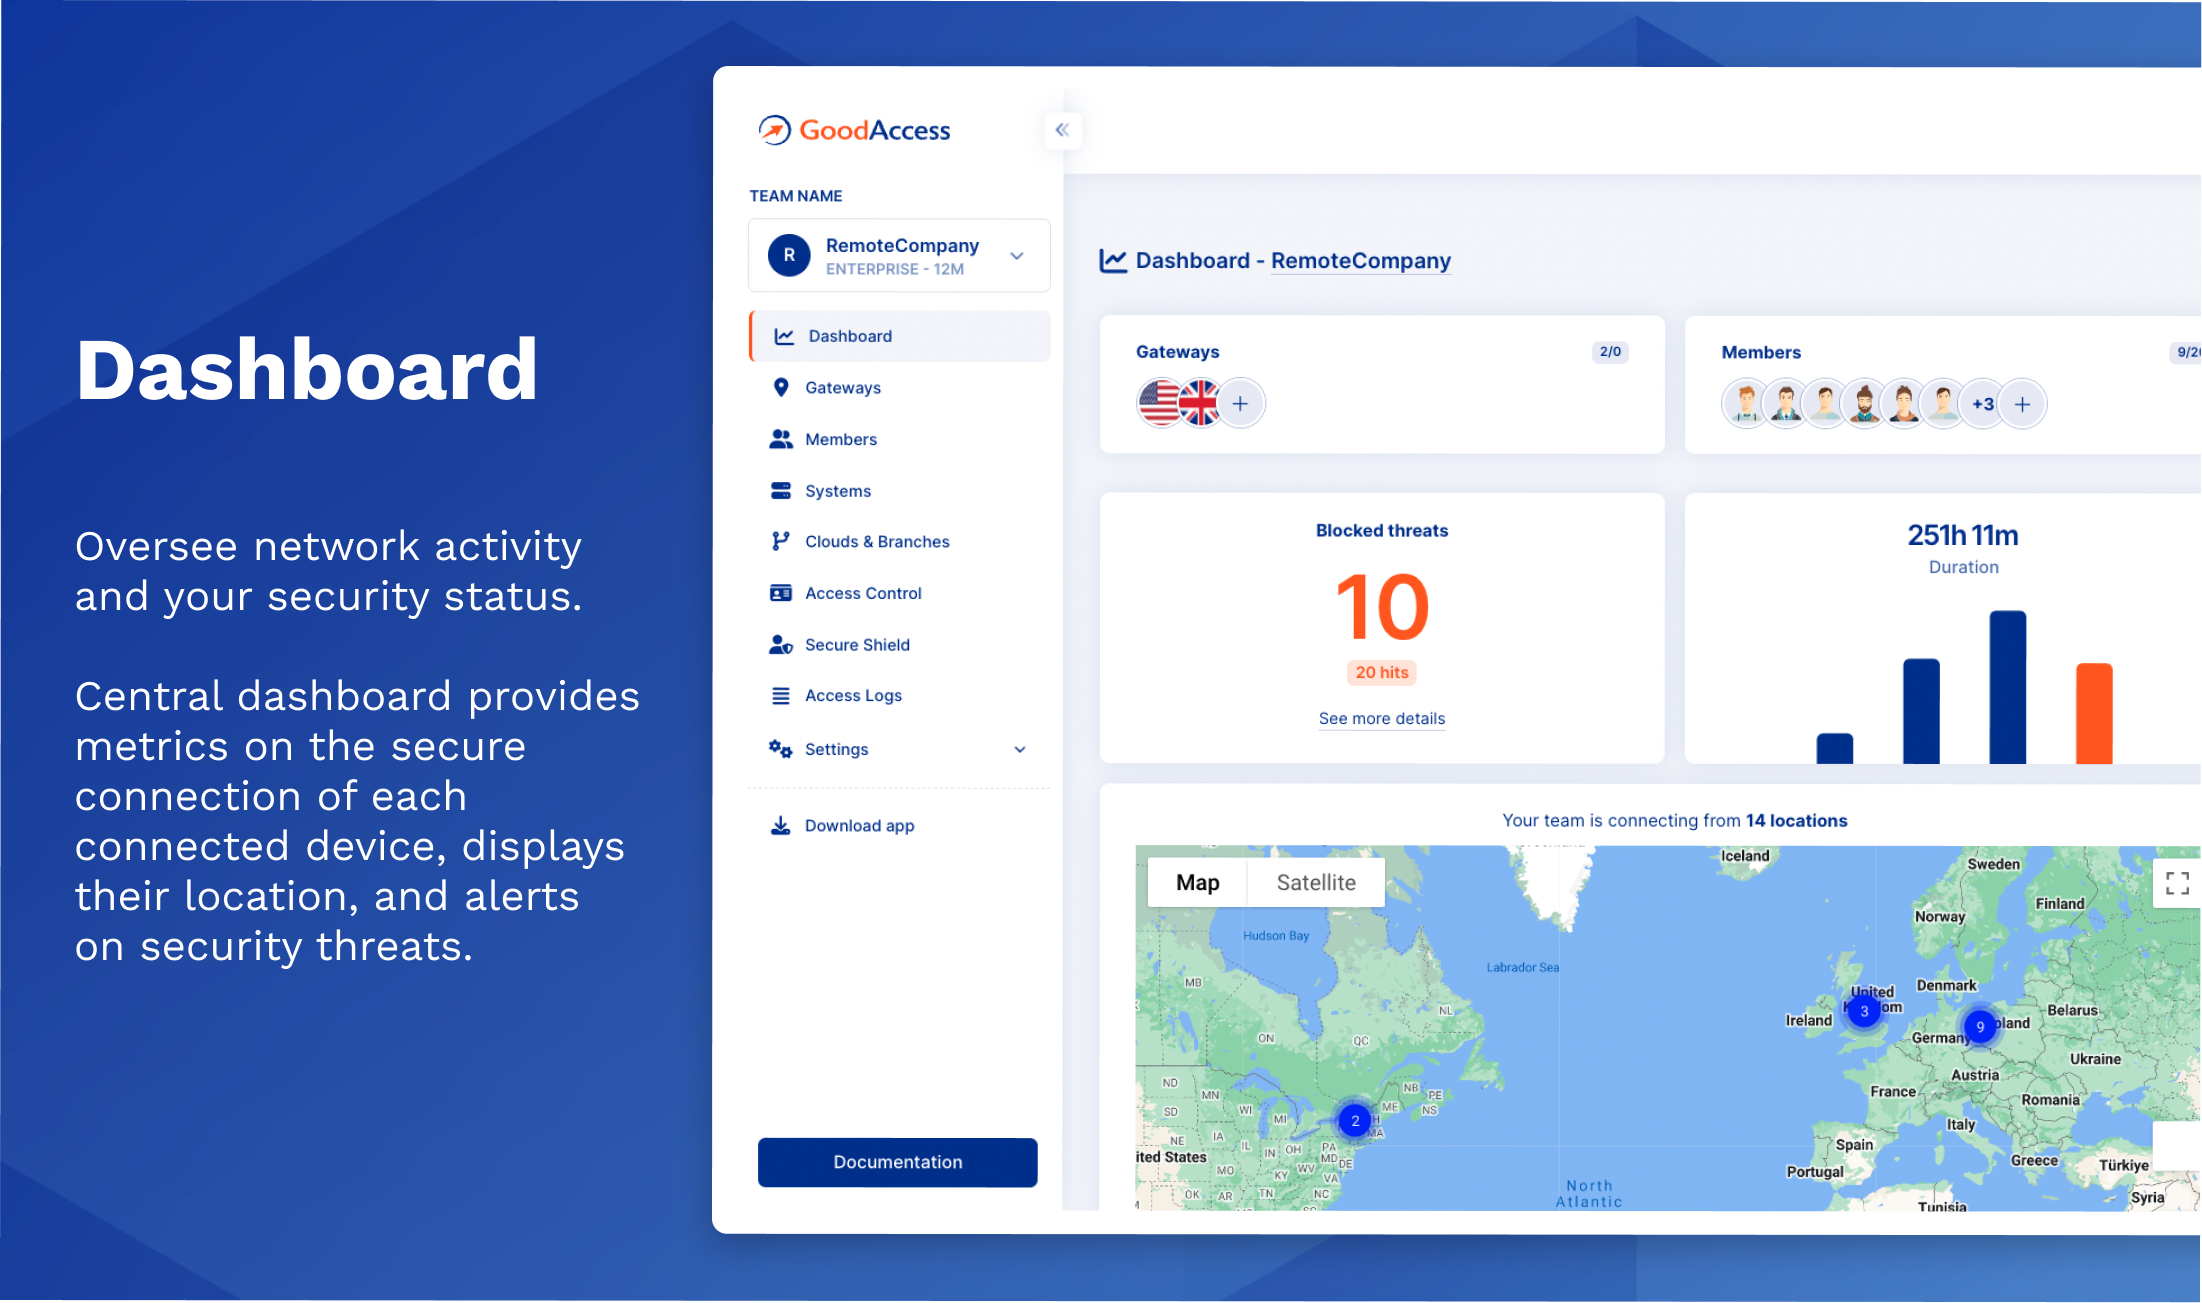 Manage your entire team's secure network from one place easily. The intuitive GoodAccess dashboard provides you with an overview and gives you full control over your team's remote access.